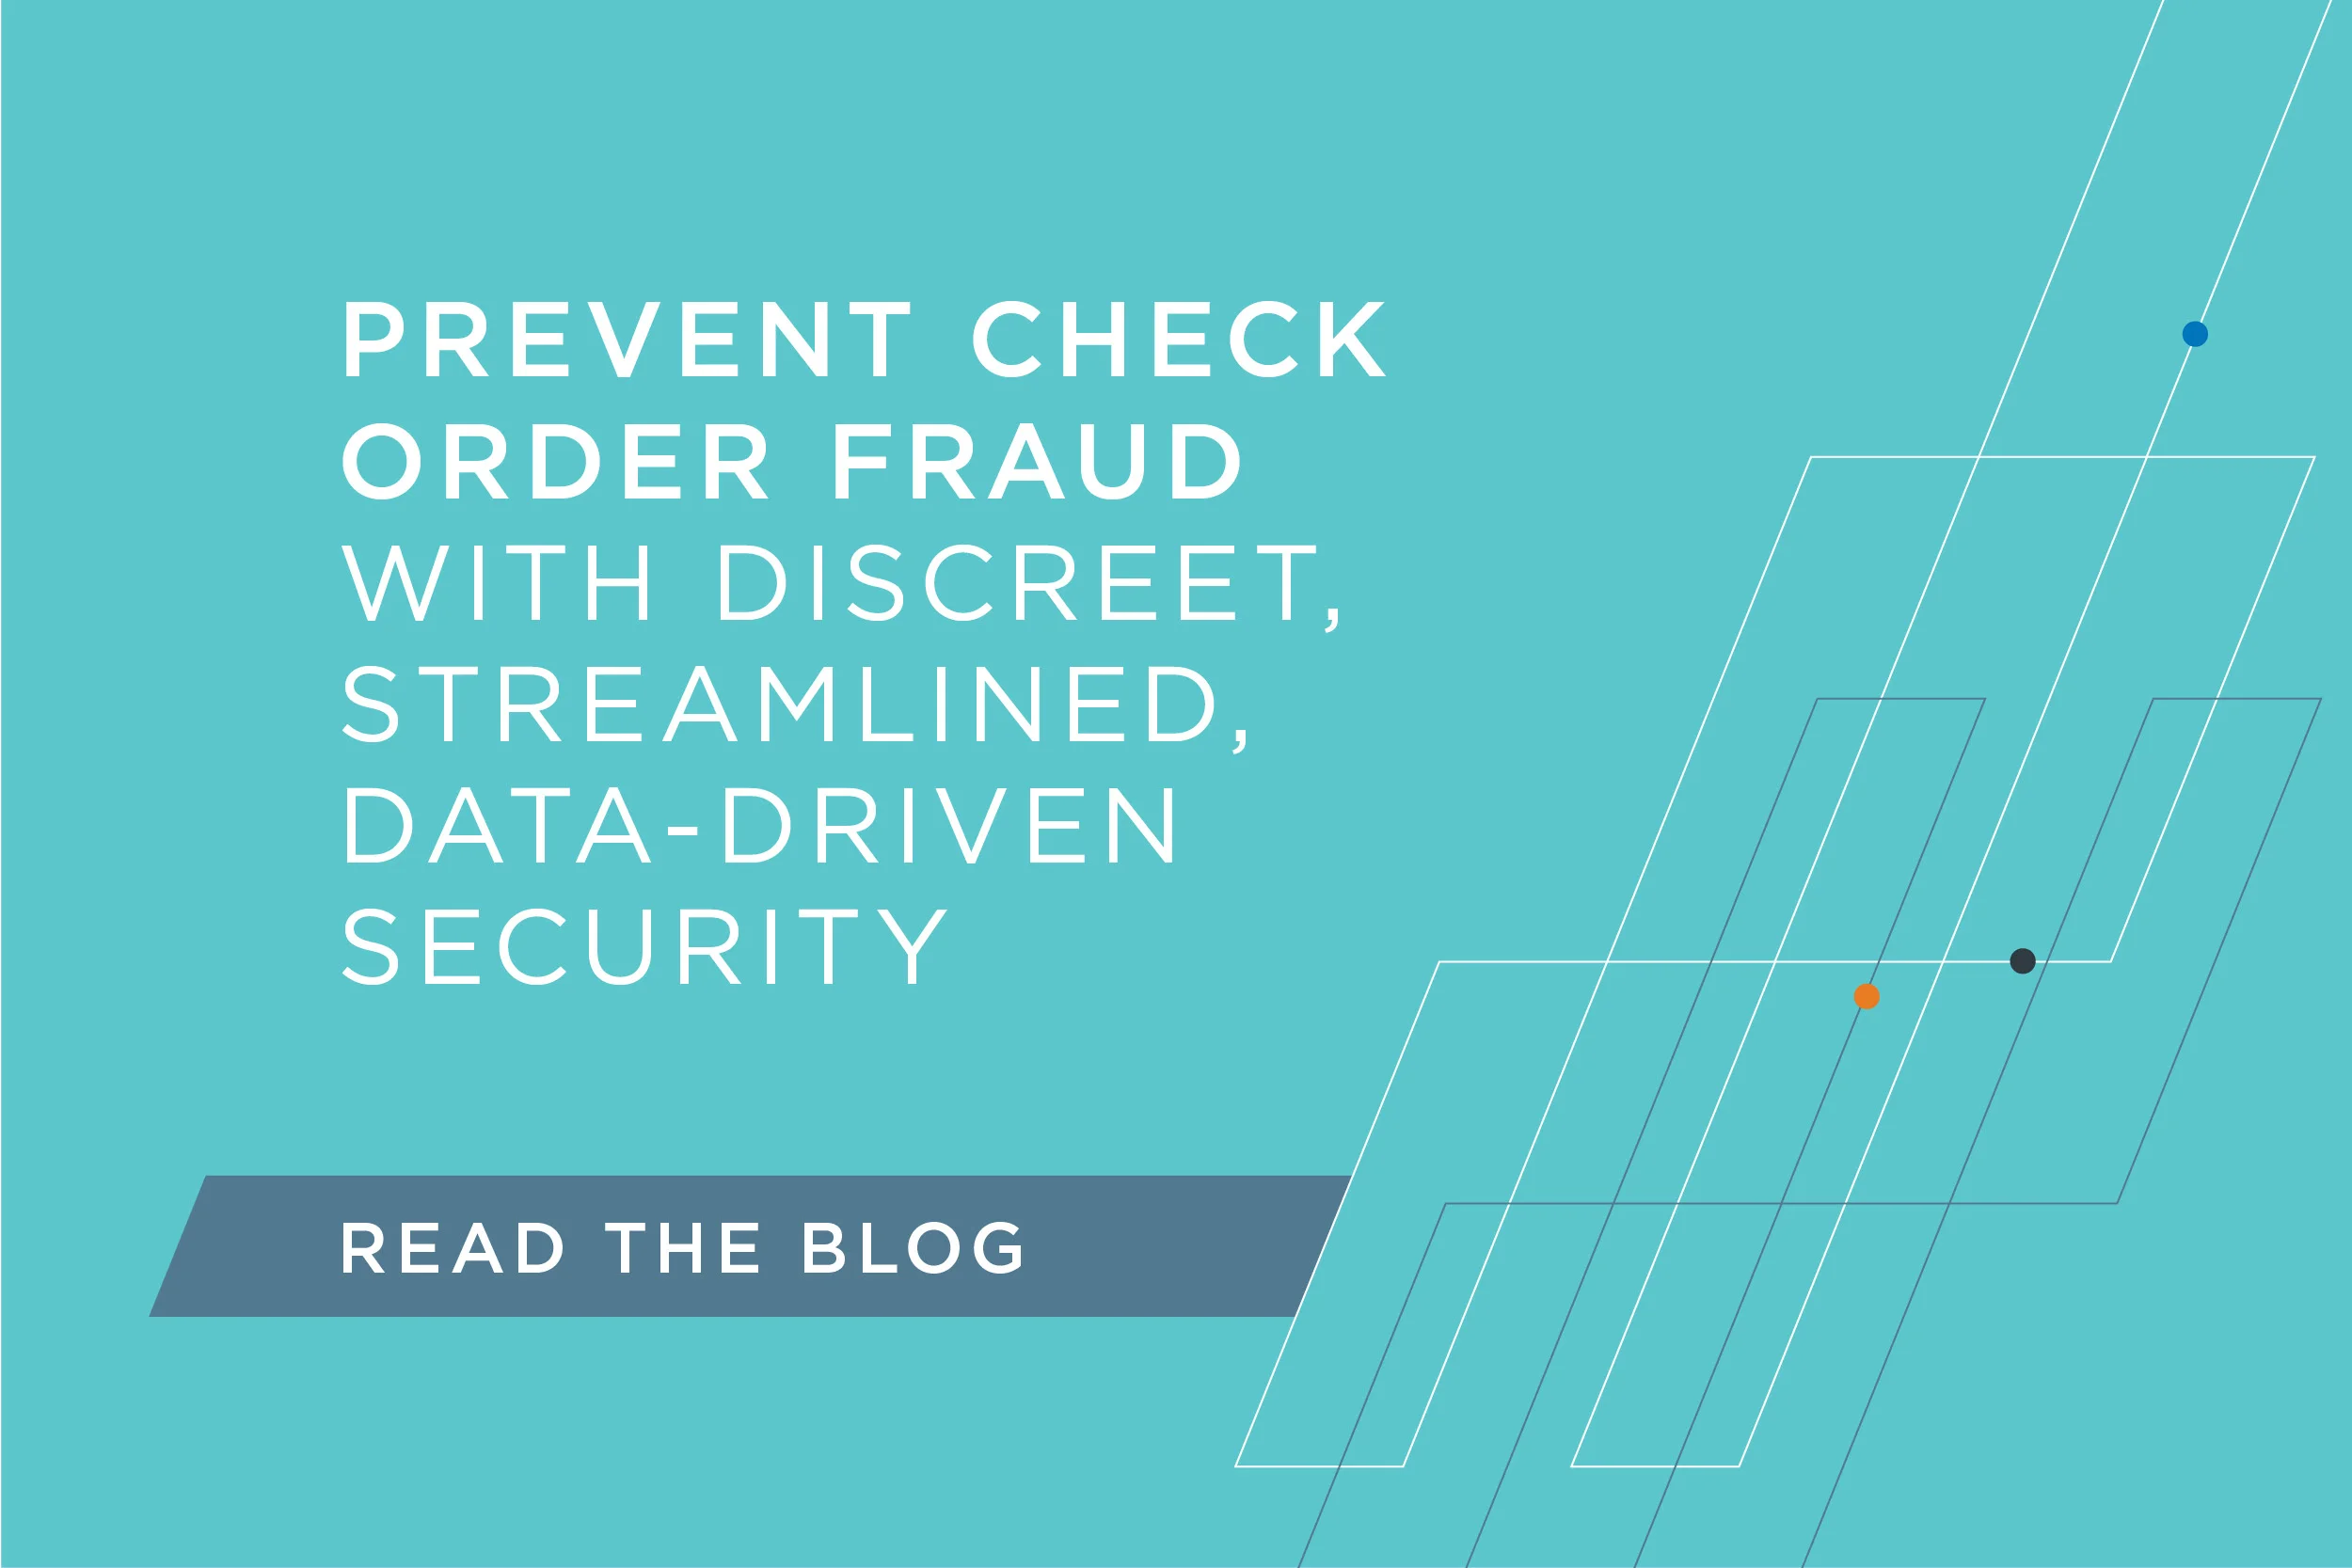 Preventing check order fraud with data-driven security